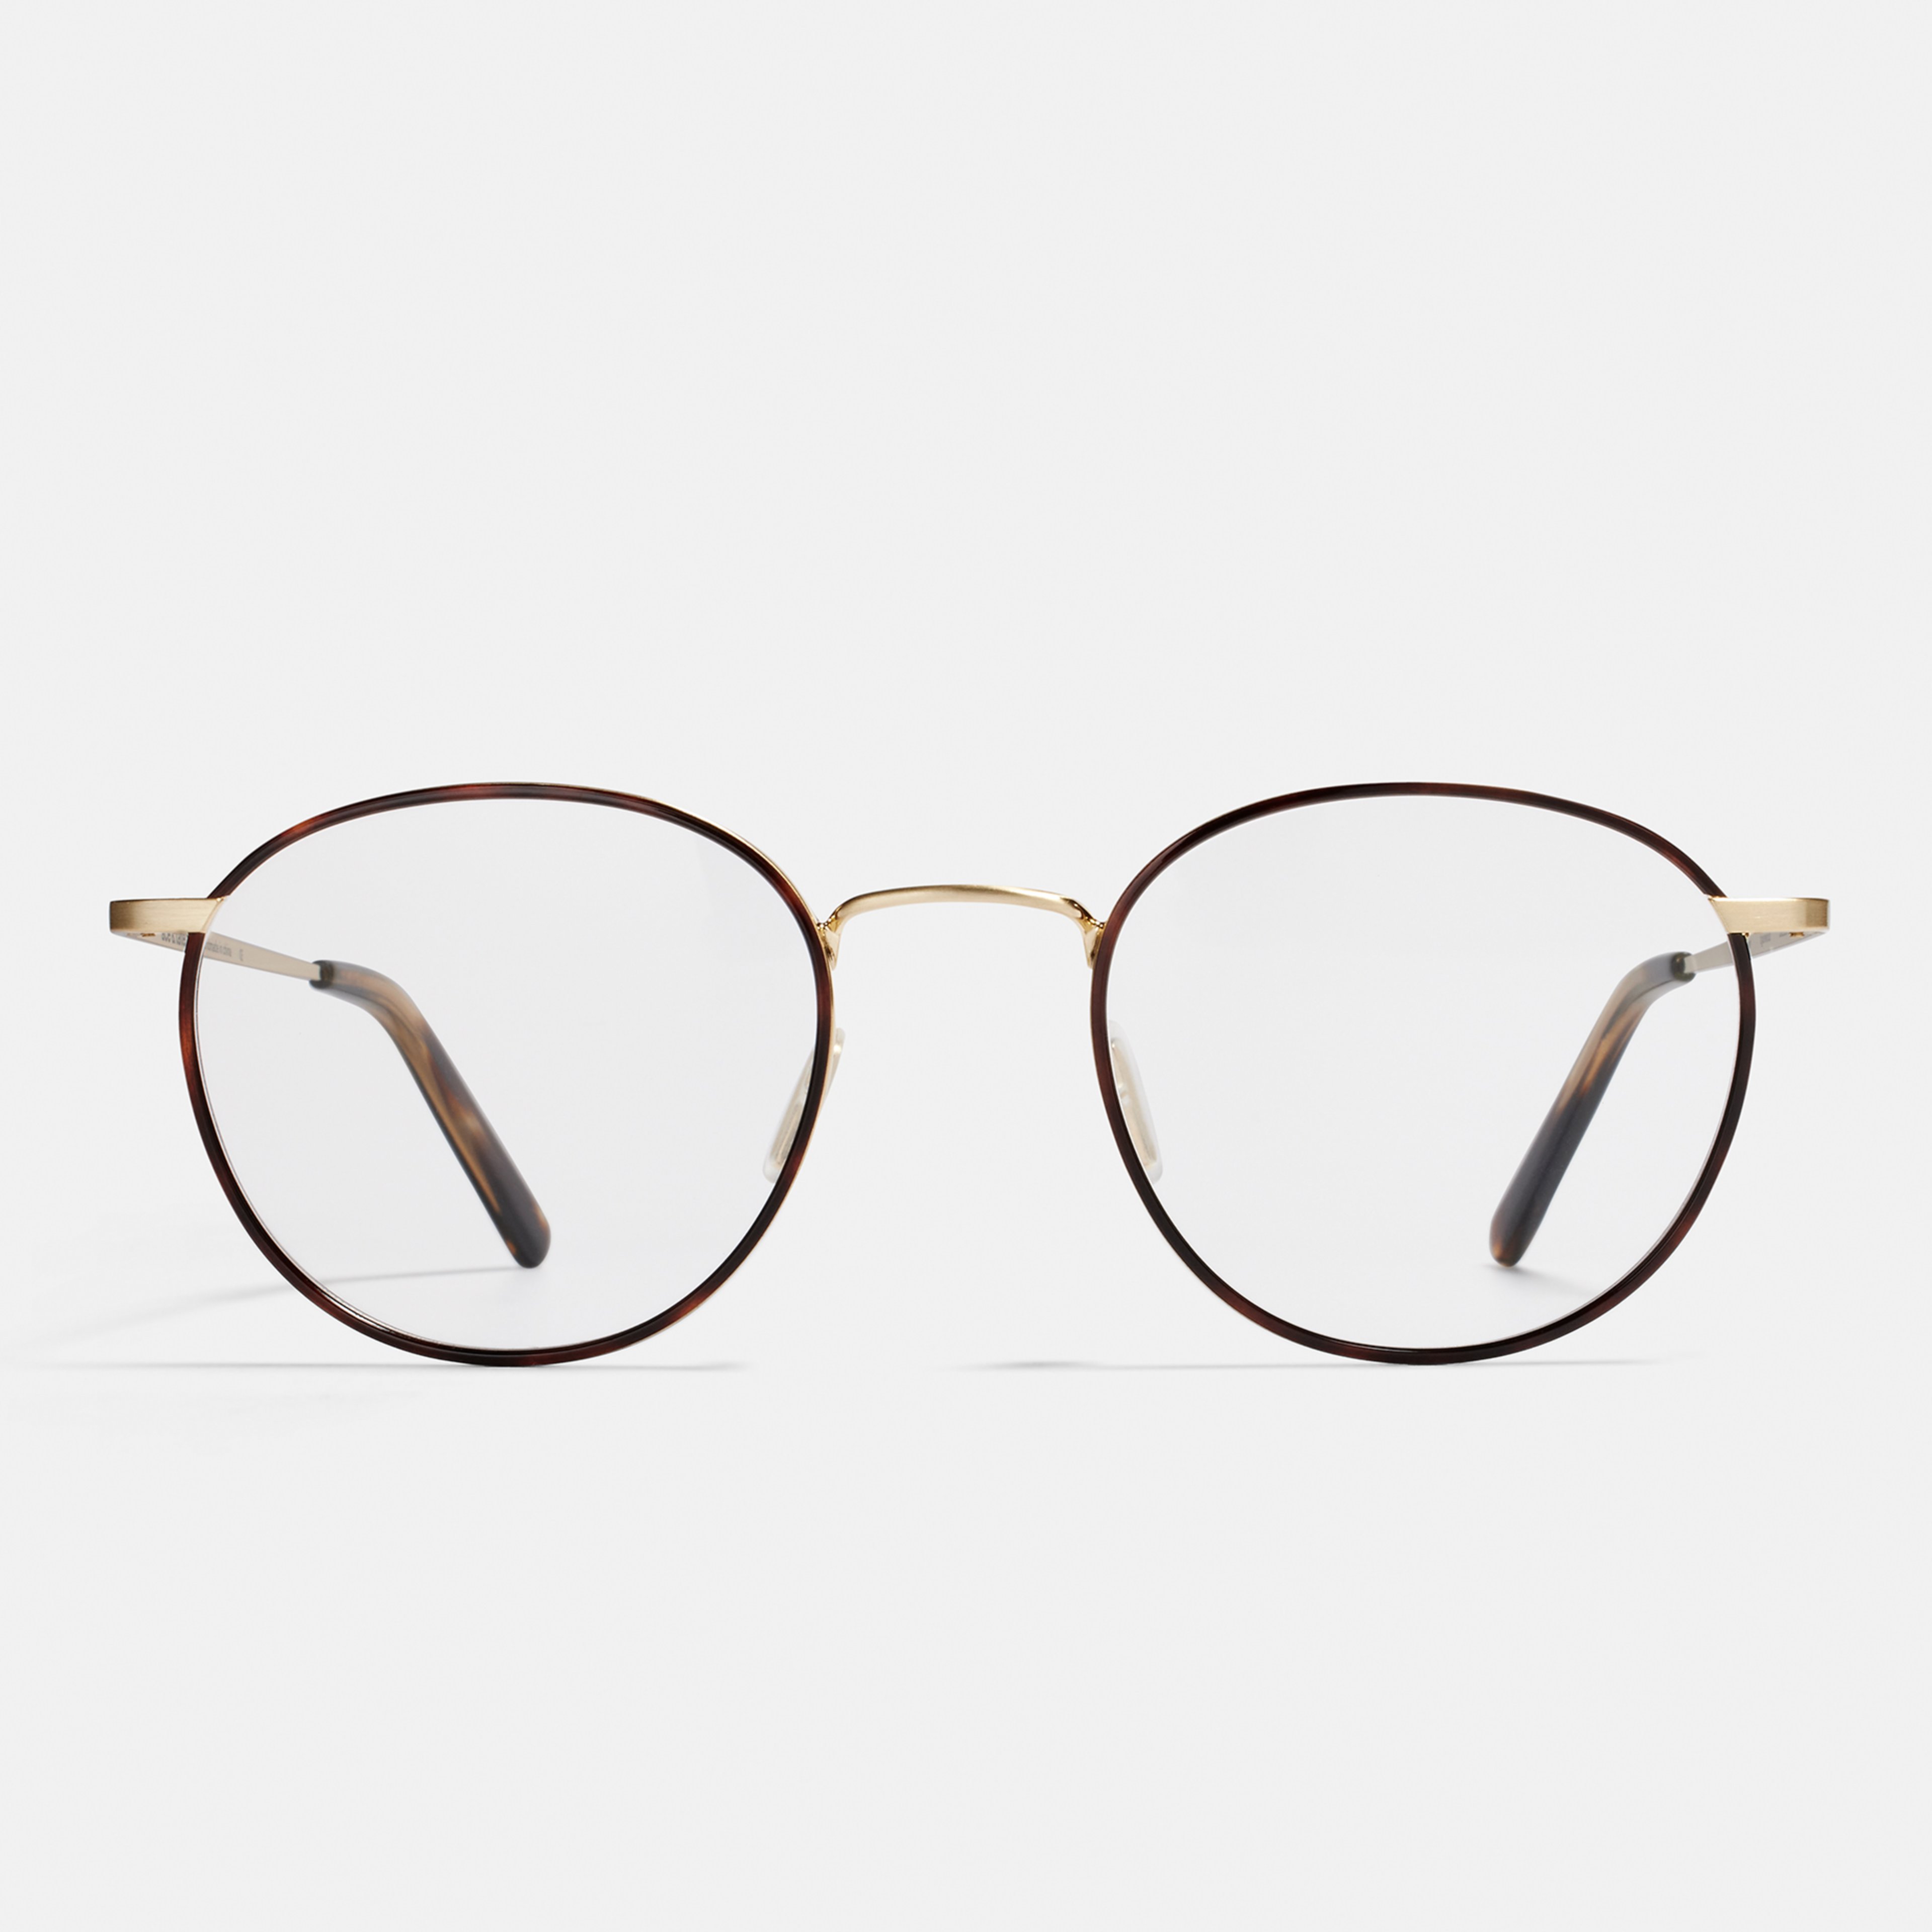 Ace & Tate Glasses | Round Metal in Beige, Brown